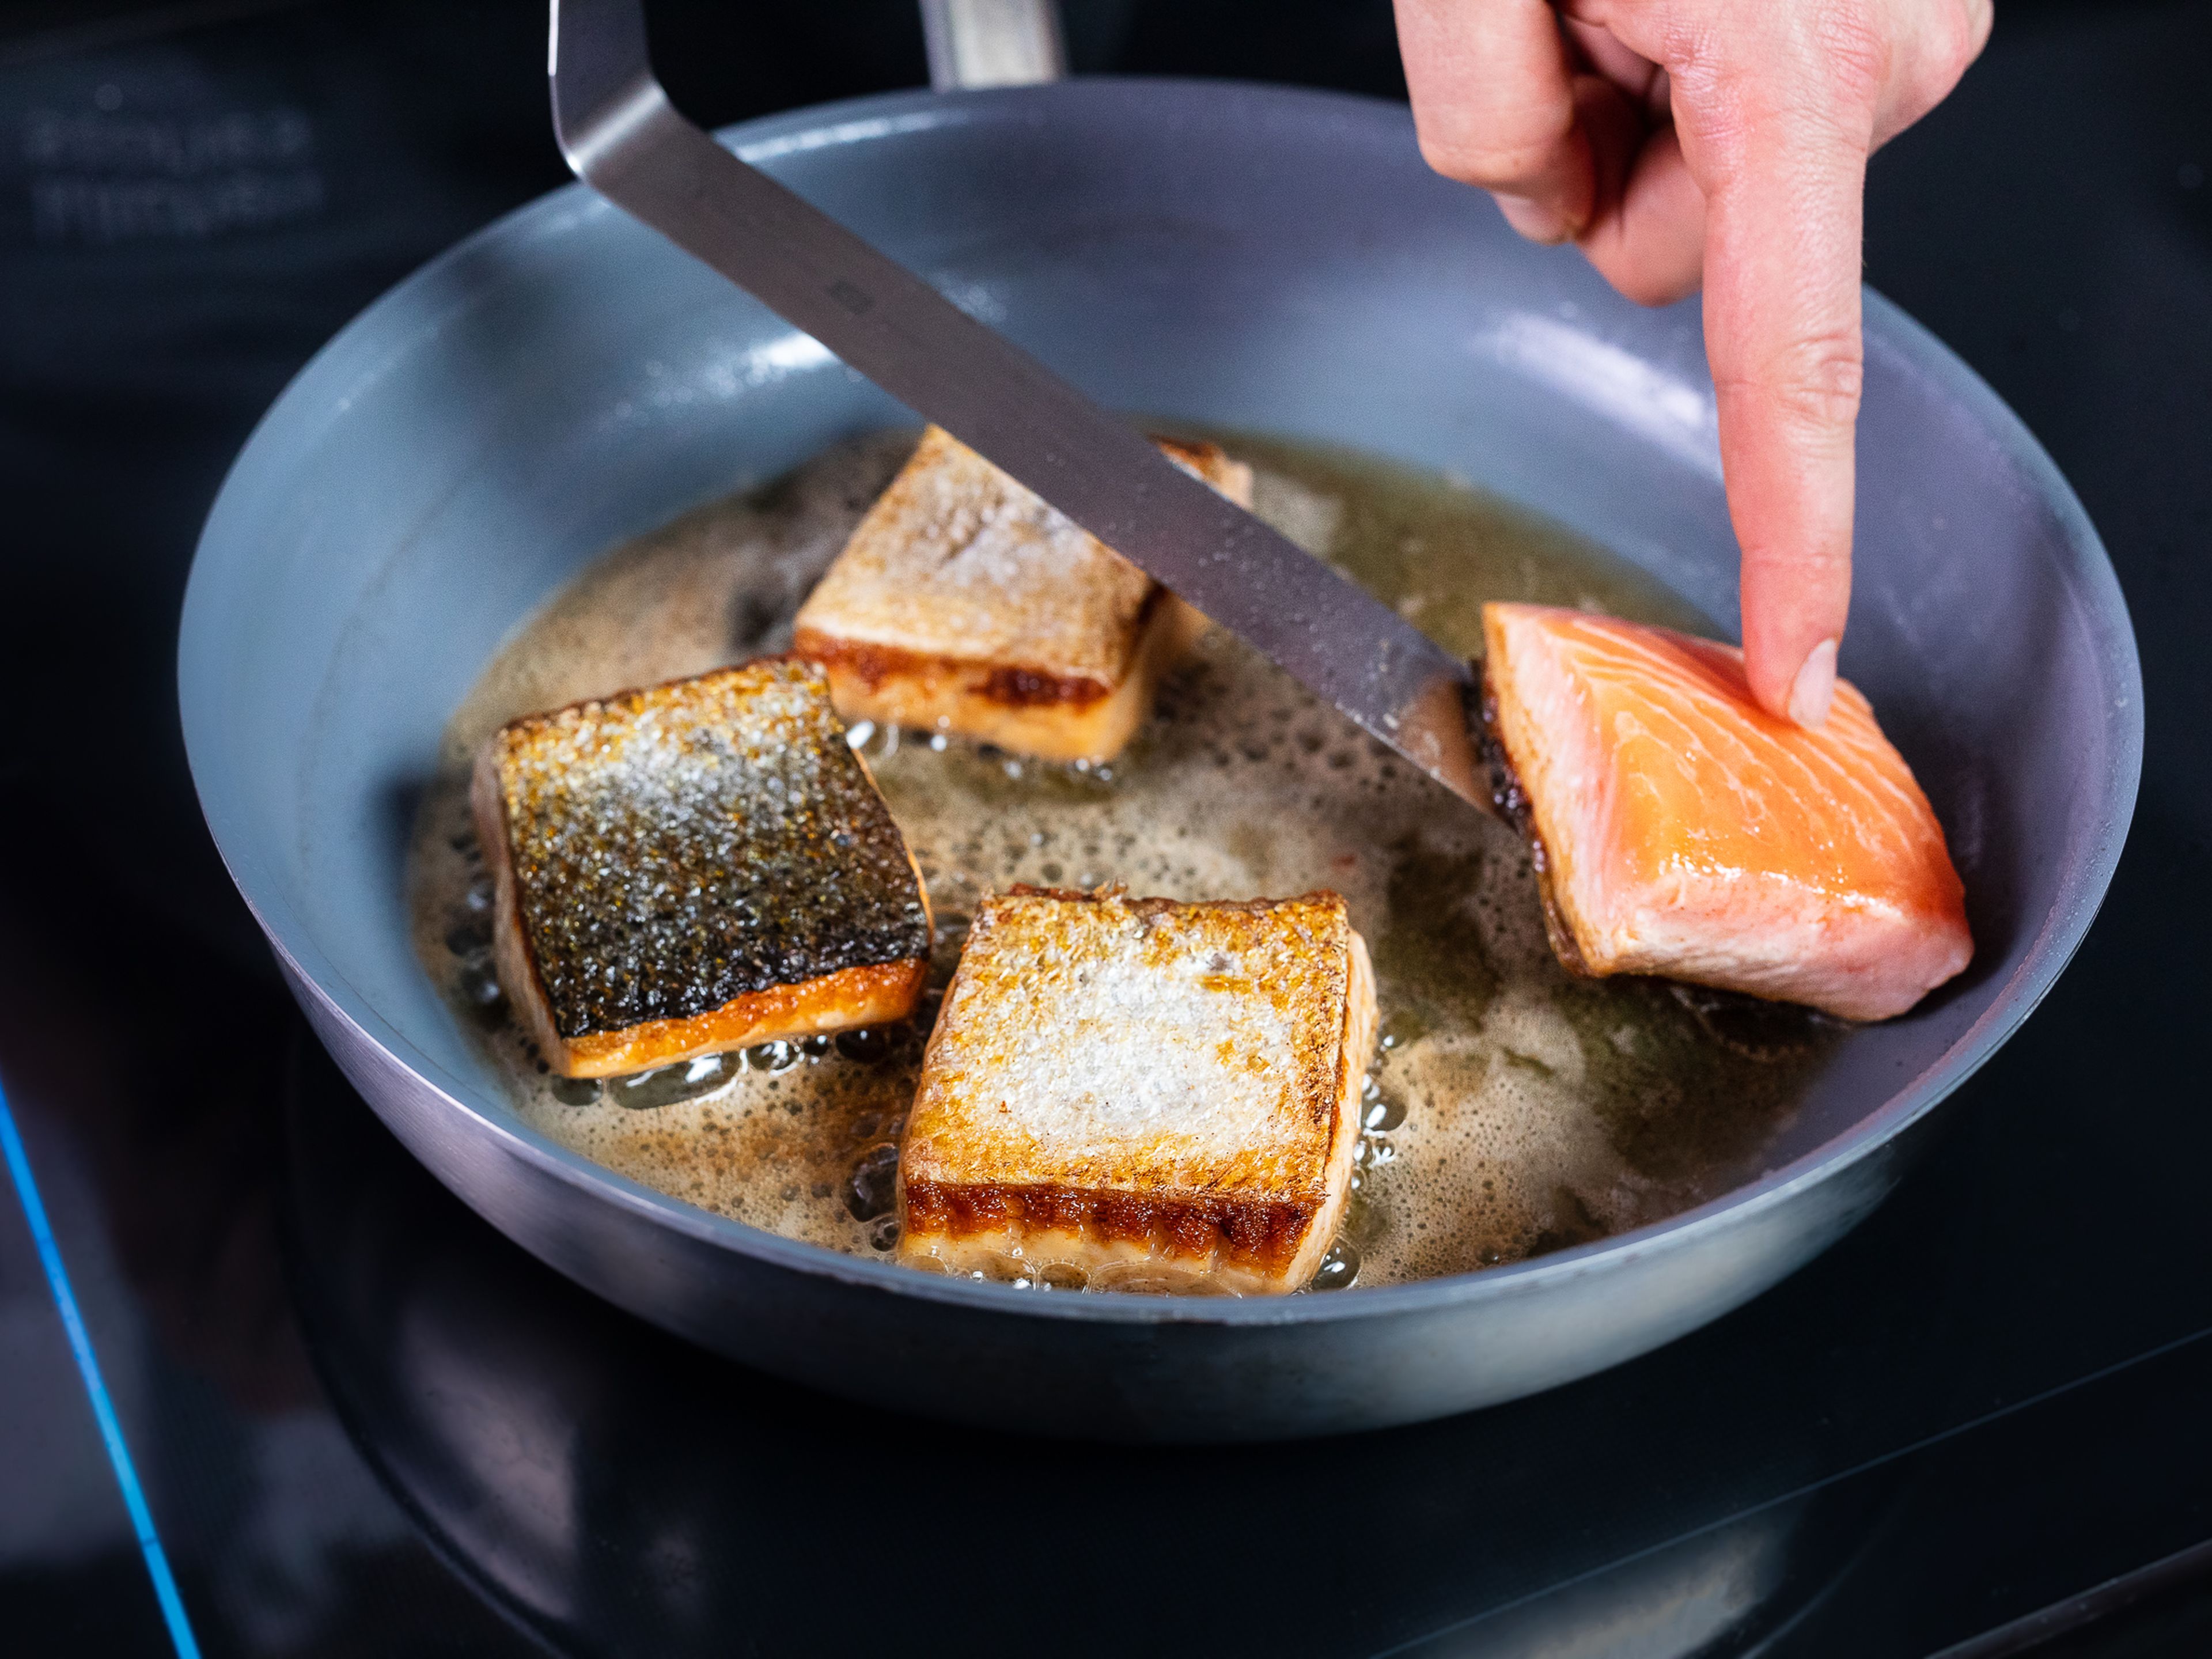 In a frying pan, heat olive oil over medium high heat, when it comes to temperature, add salmon filets to the pan, skin side down. Season salmon with salt and pepper, and add butter to the pan. Let cook for approx. 3 - 5 min.